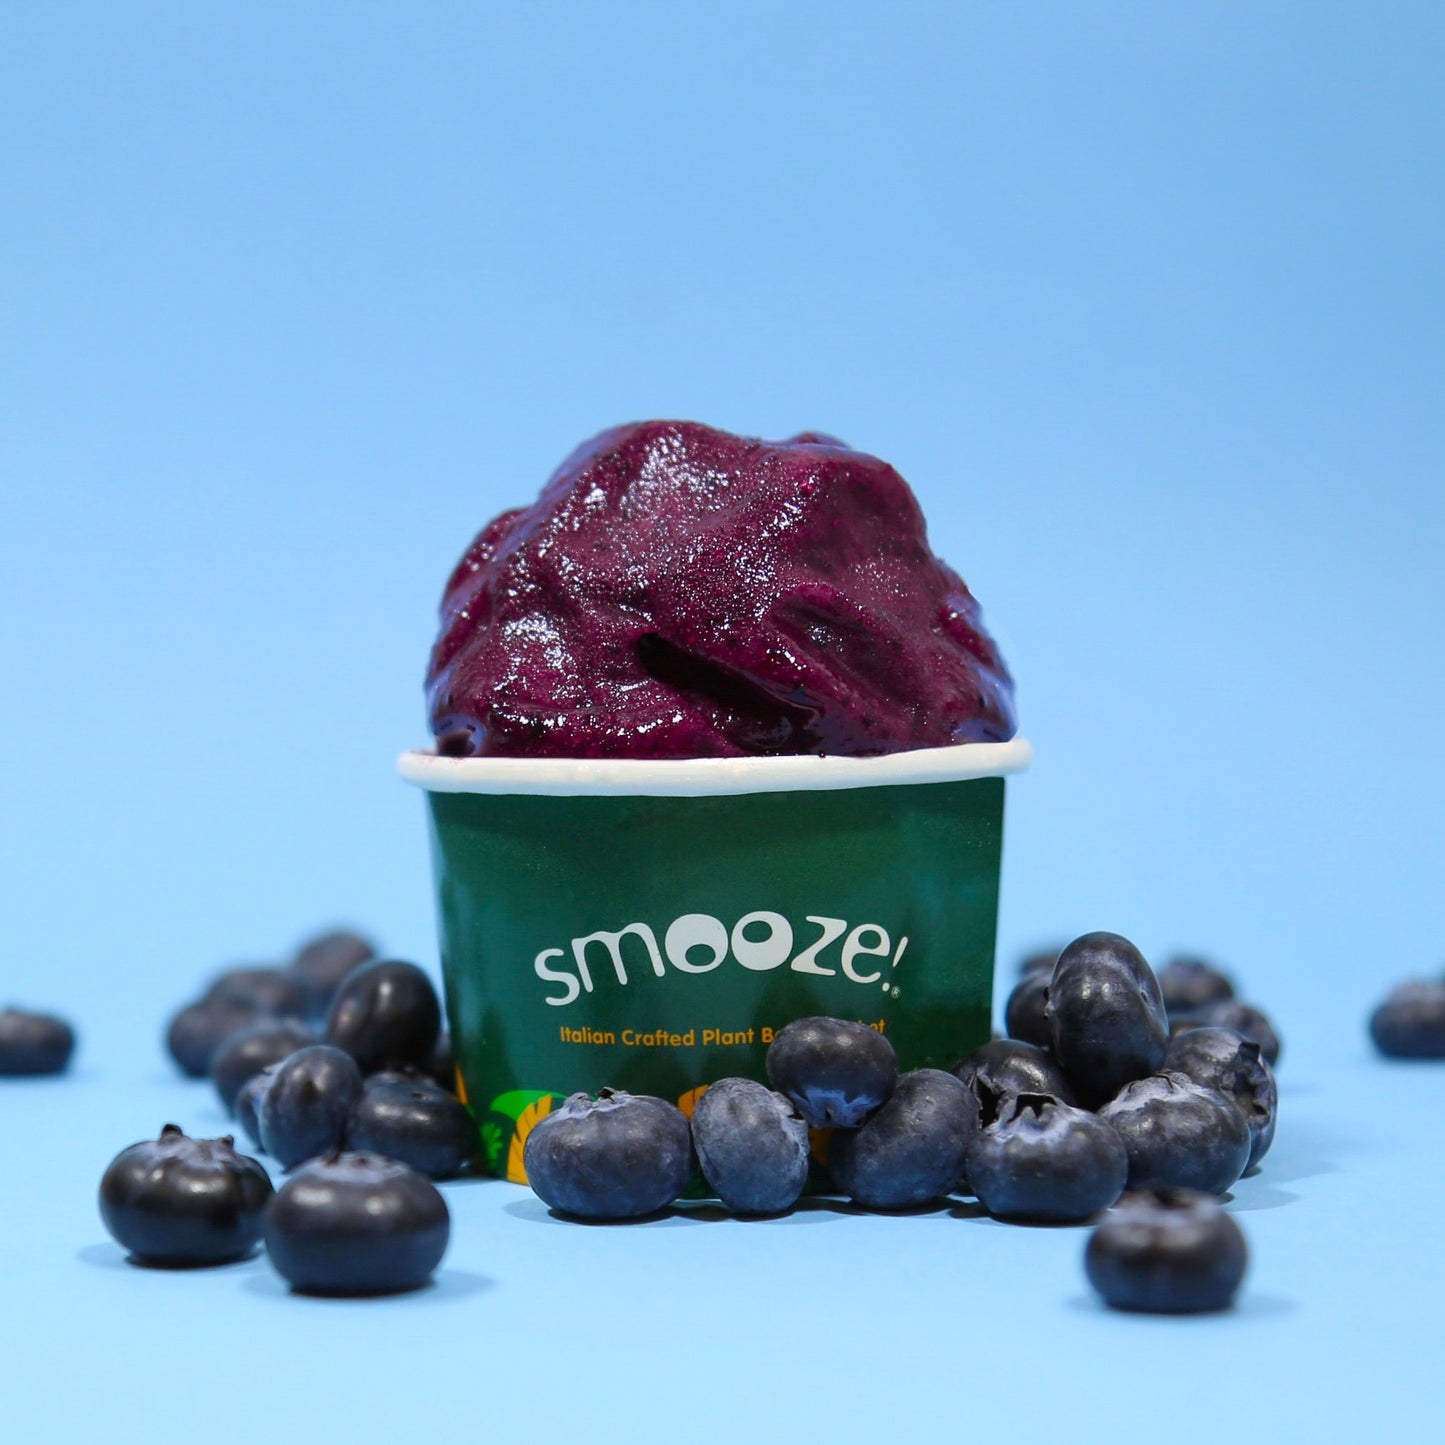 Smooze!™ Blueberry Sorbetto - Italian Crafted Plant-Based Sorbet (2 Tubs)